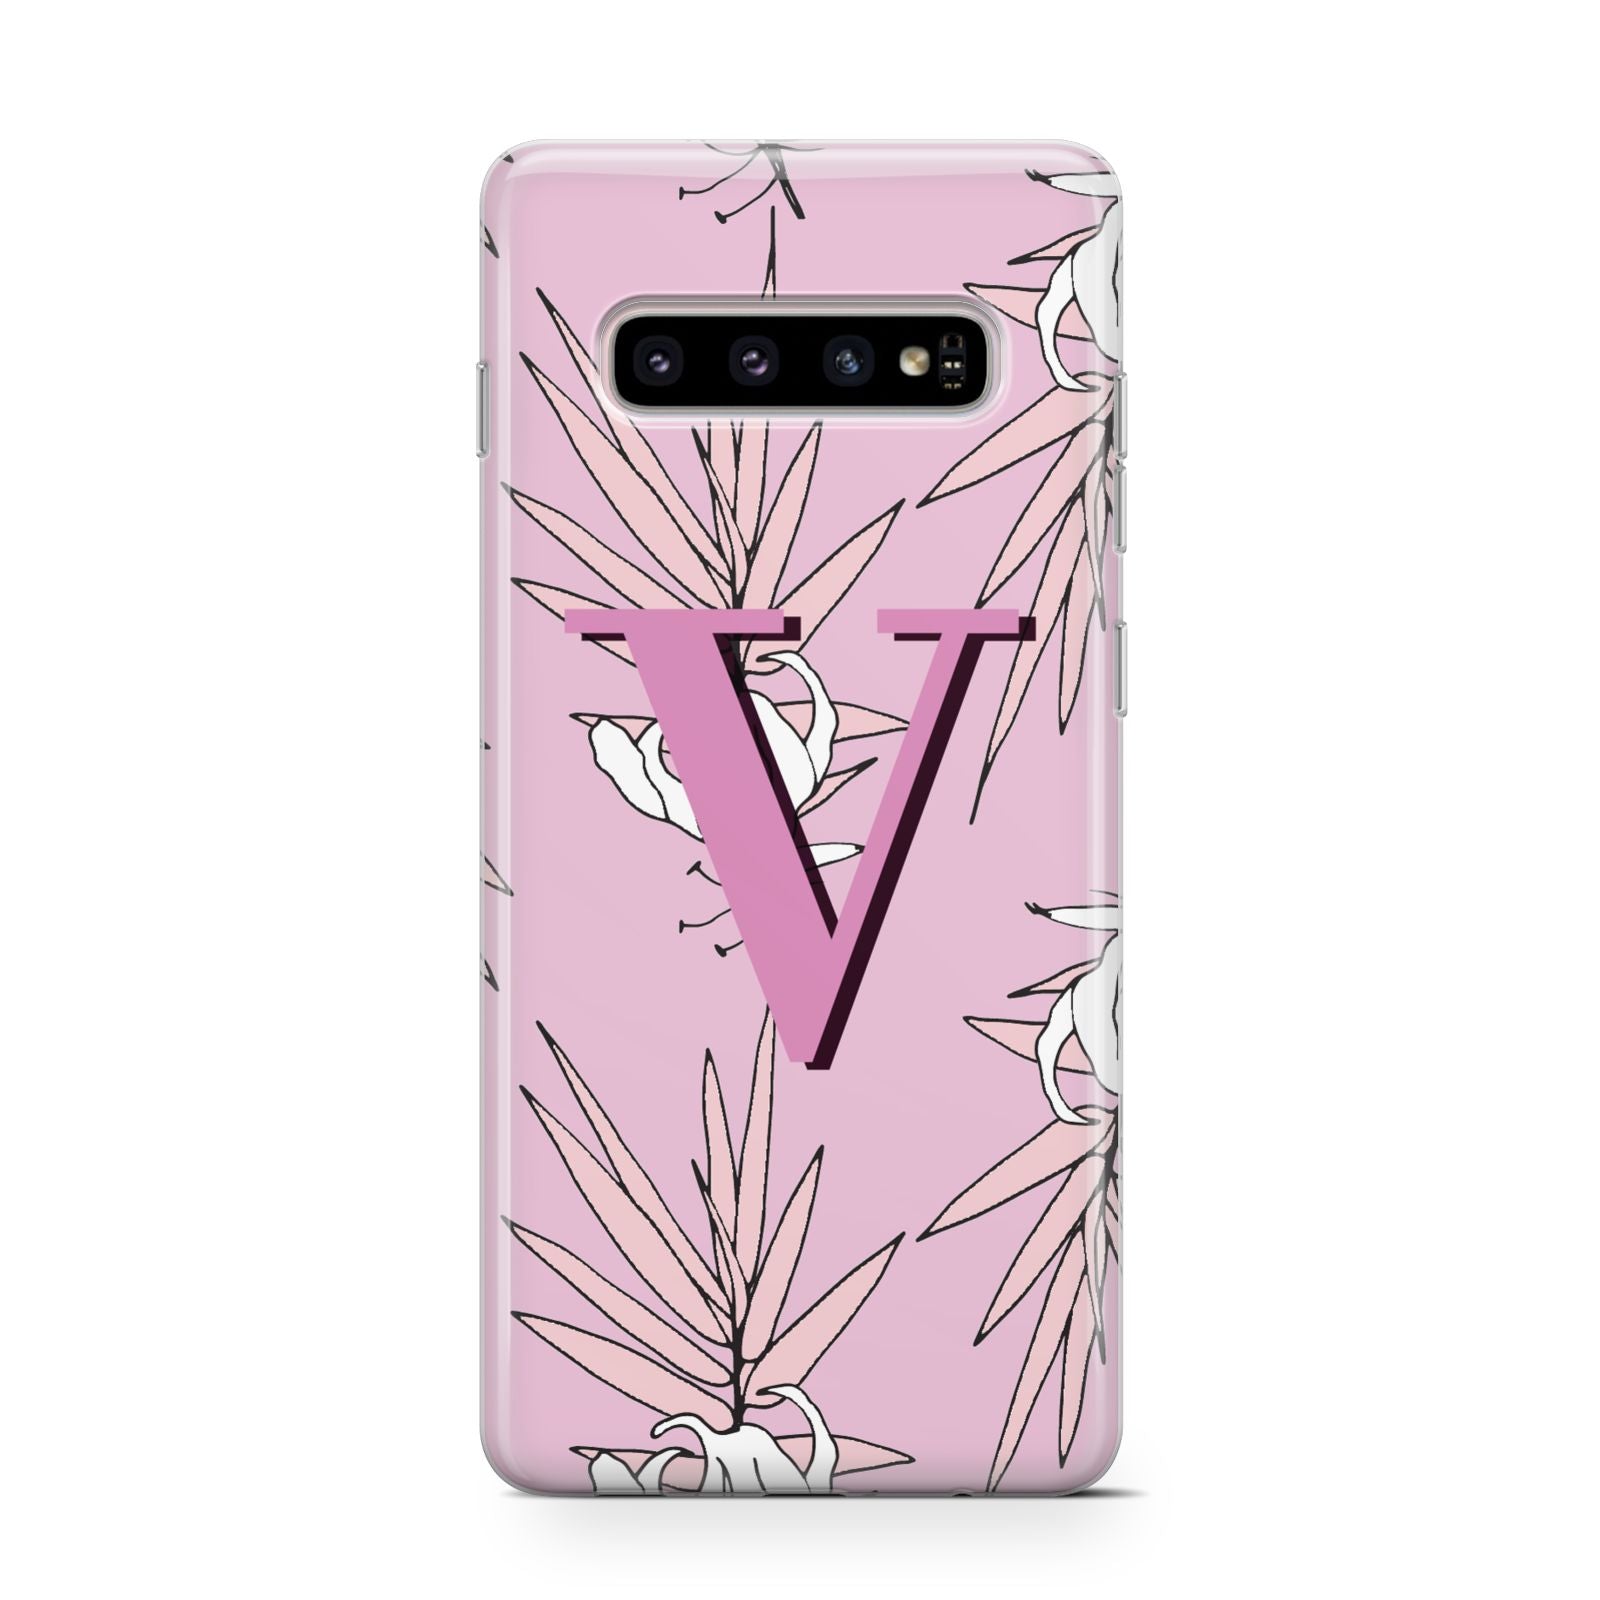 Personalised Pink and White Floral Monogram Samsung Galaxy S10 Case